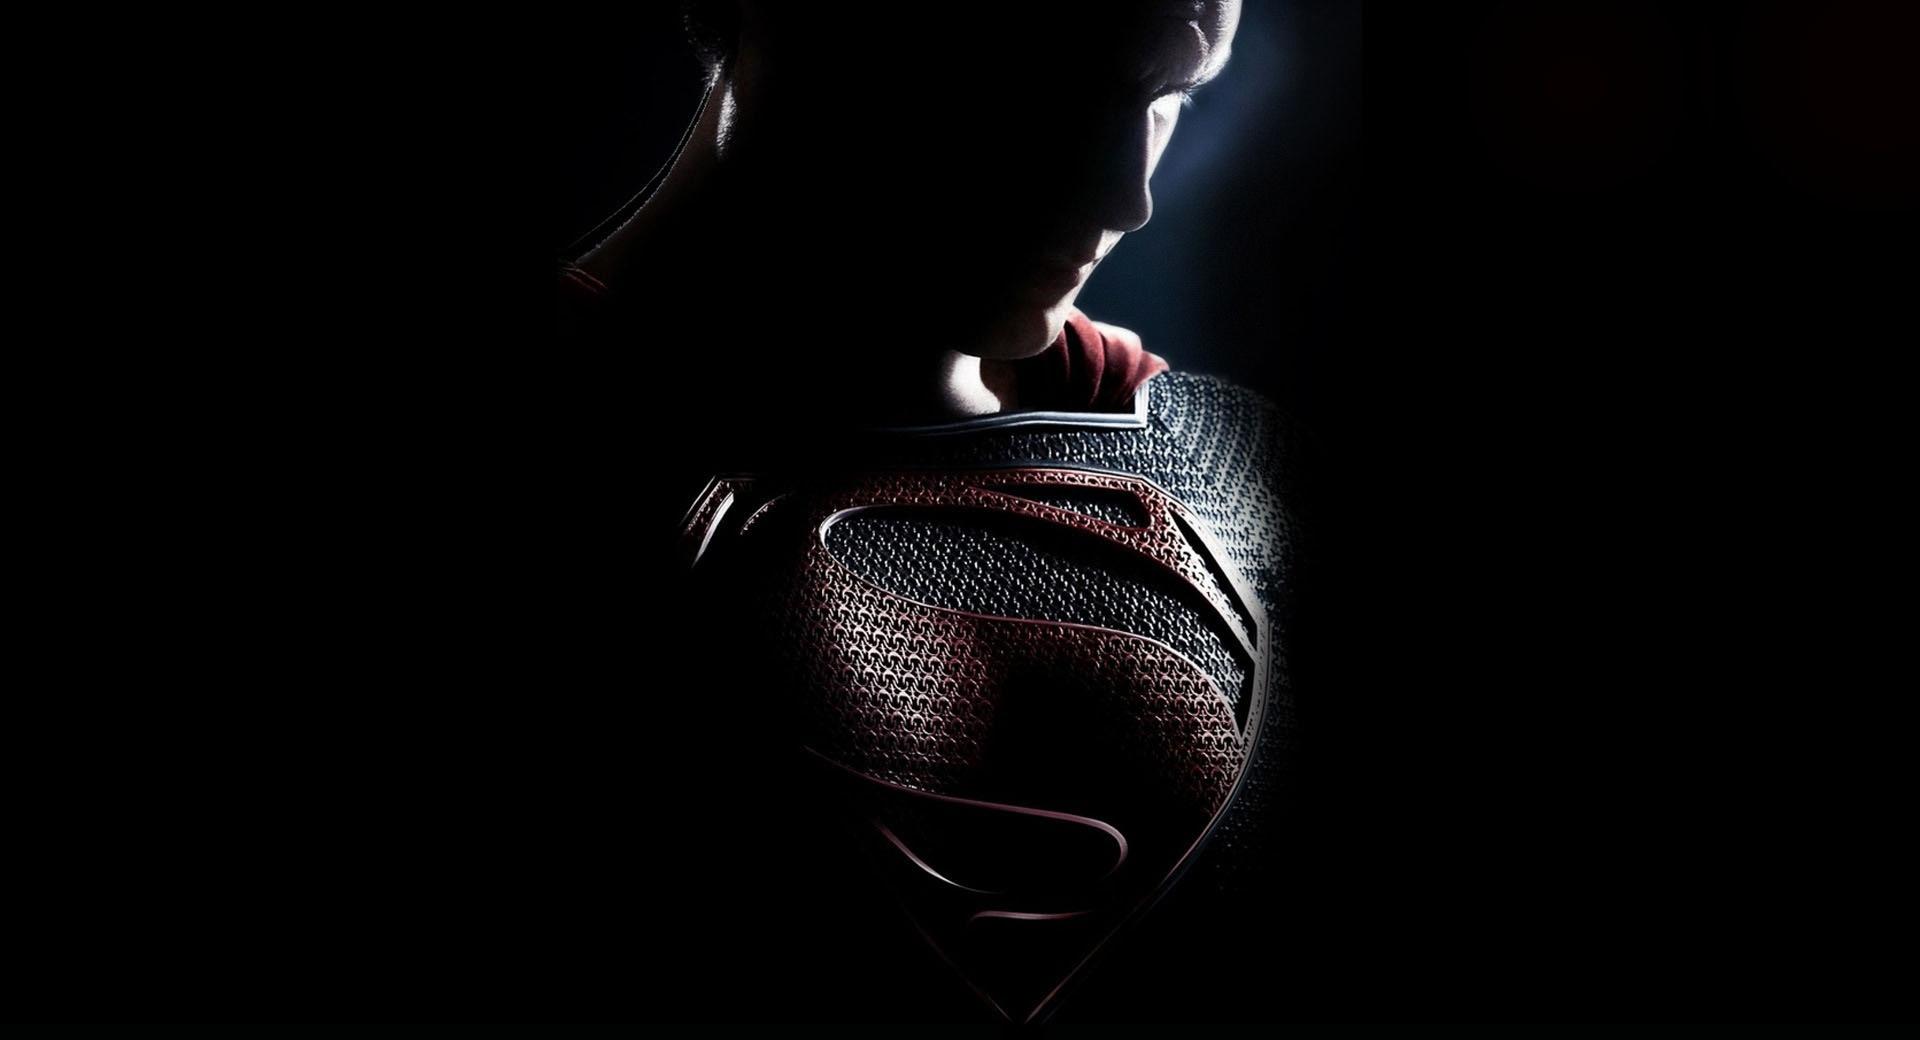 Man Of Steel 2013 Superman wallpapers HD quality